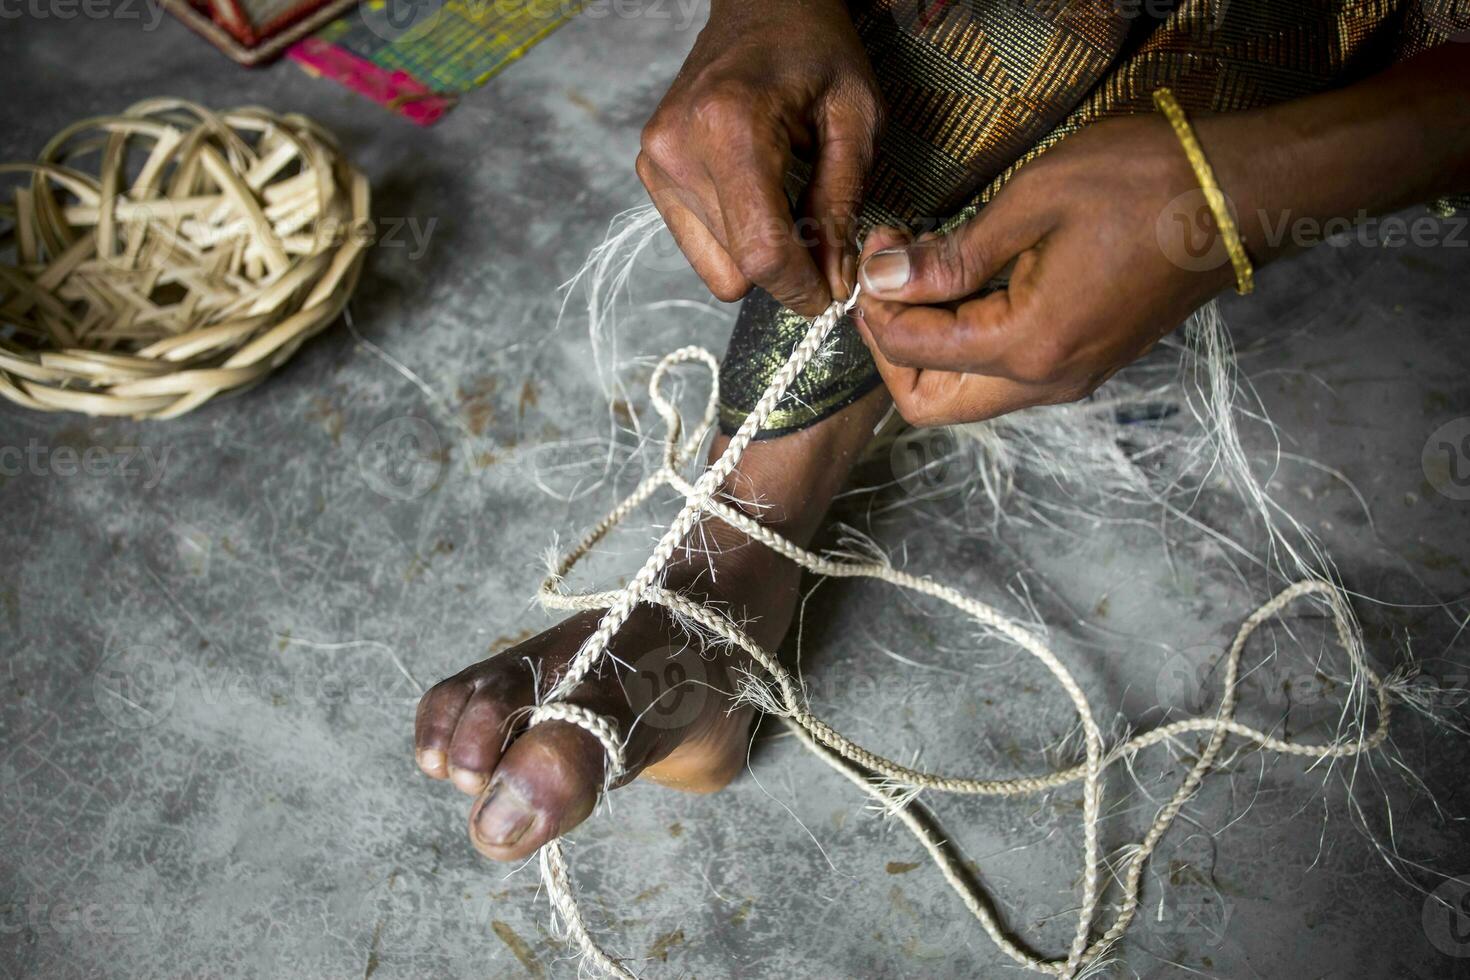 An woman is making a rope from the fibers of a banana tree with